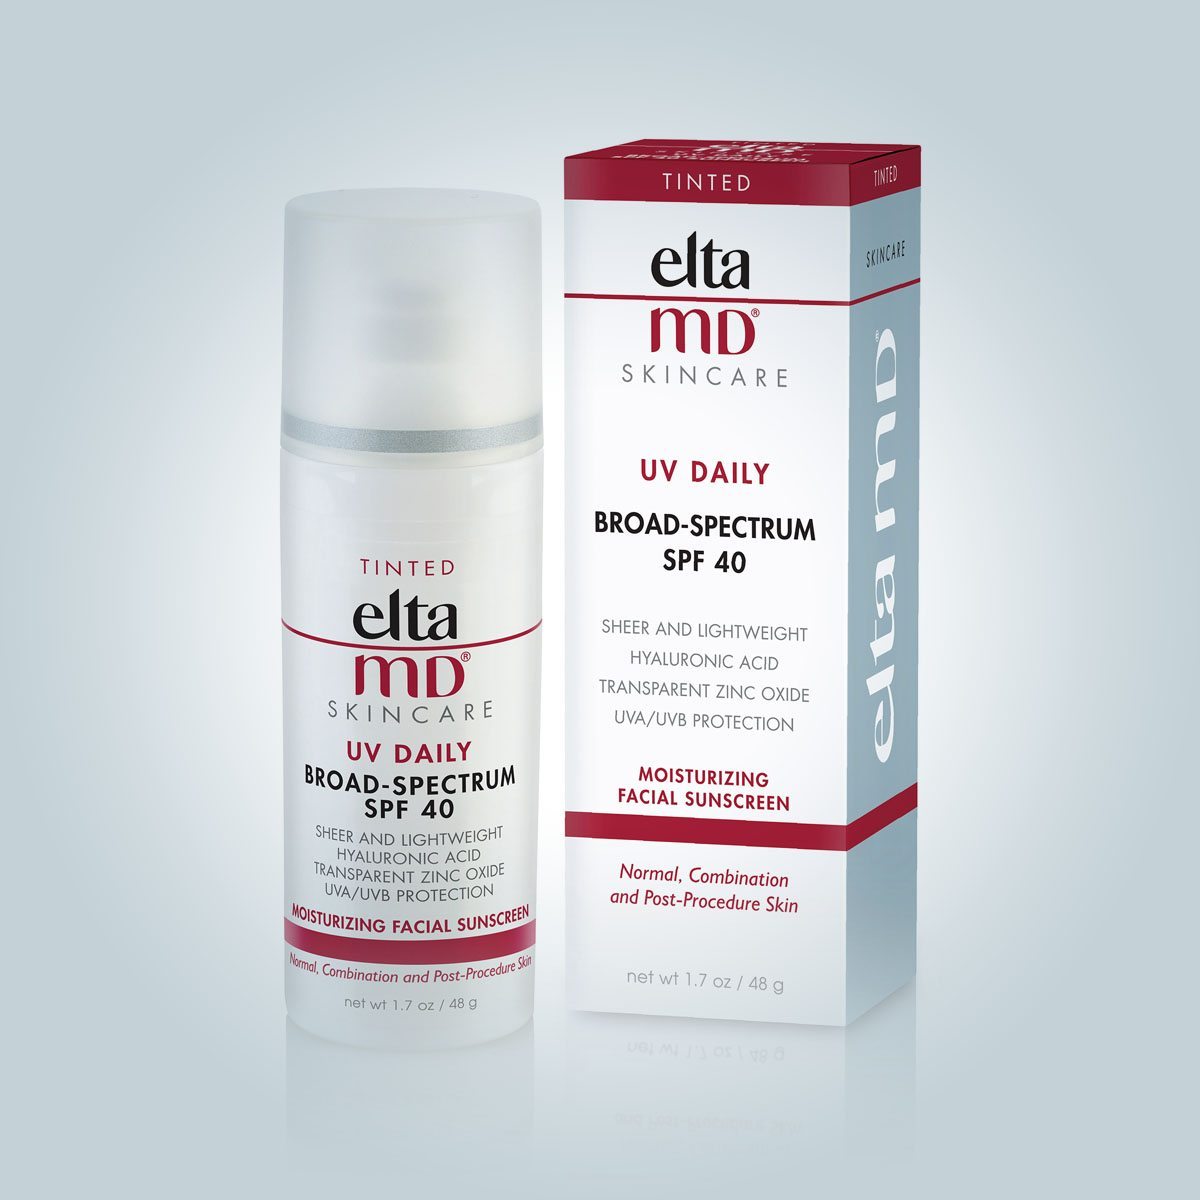 Elta MD products